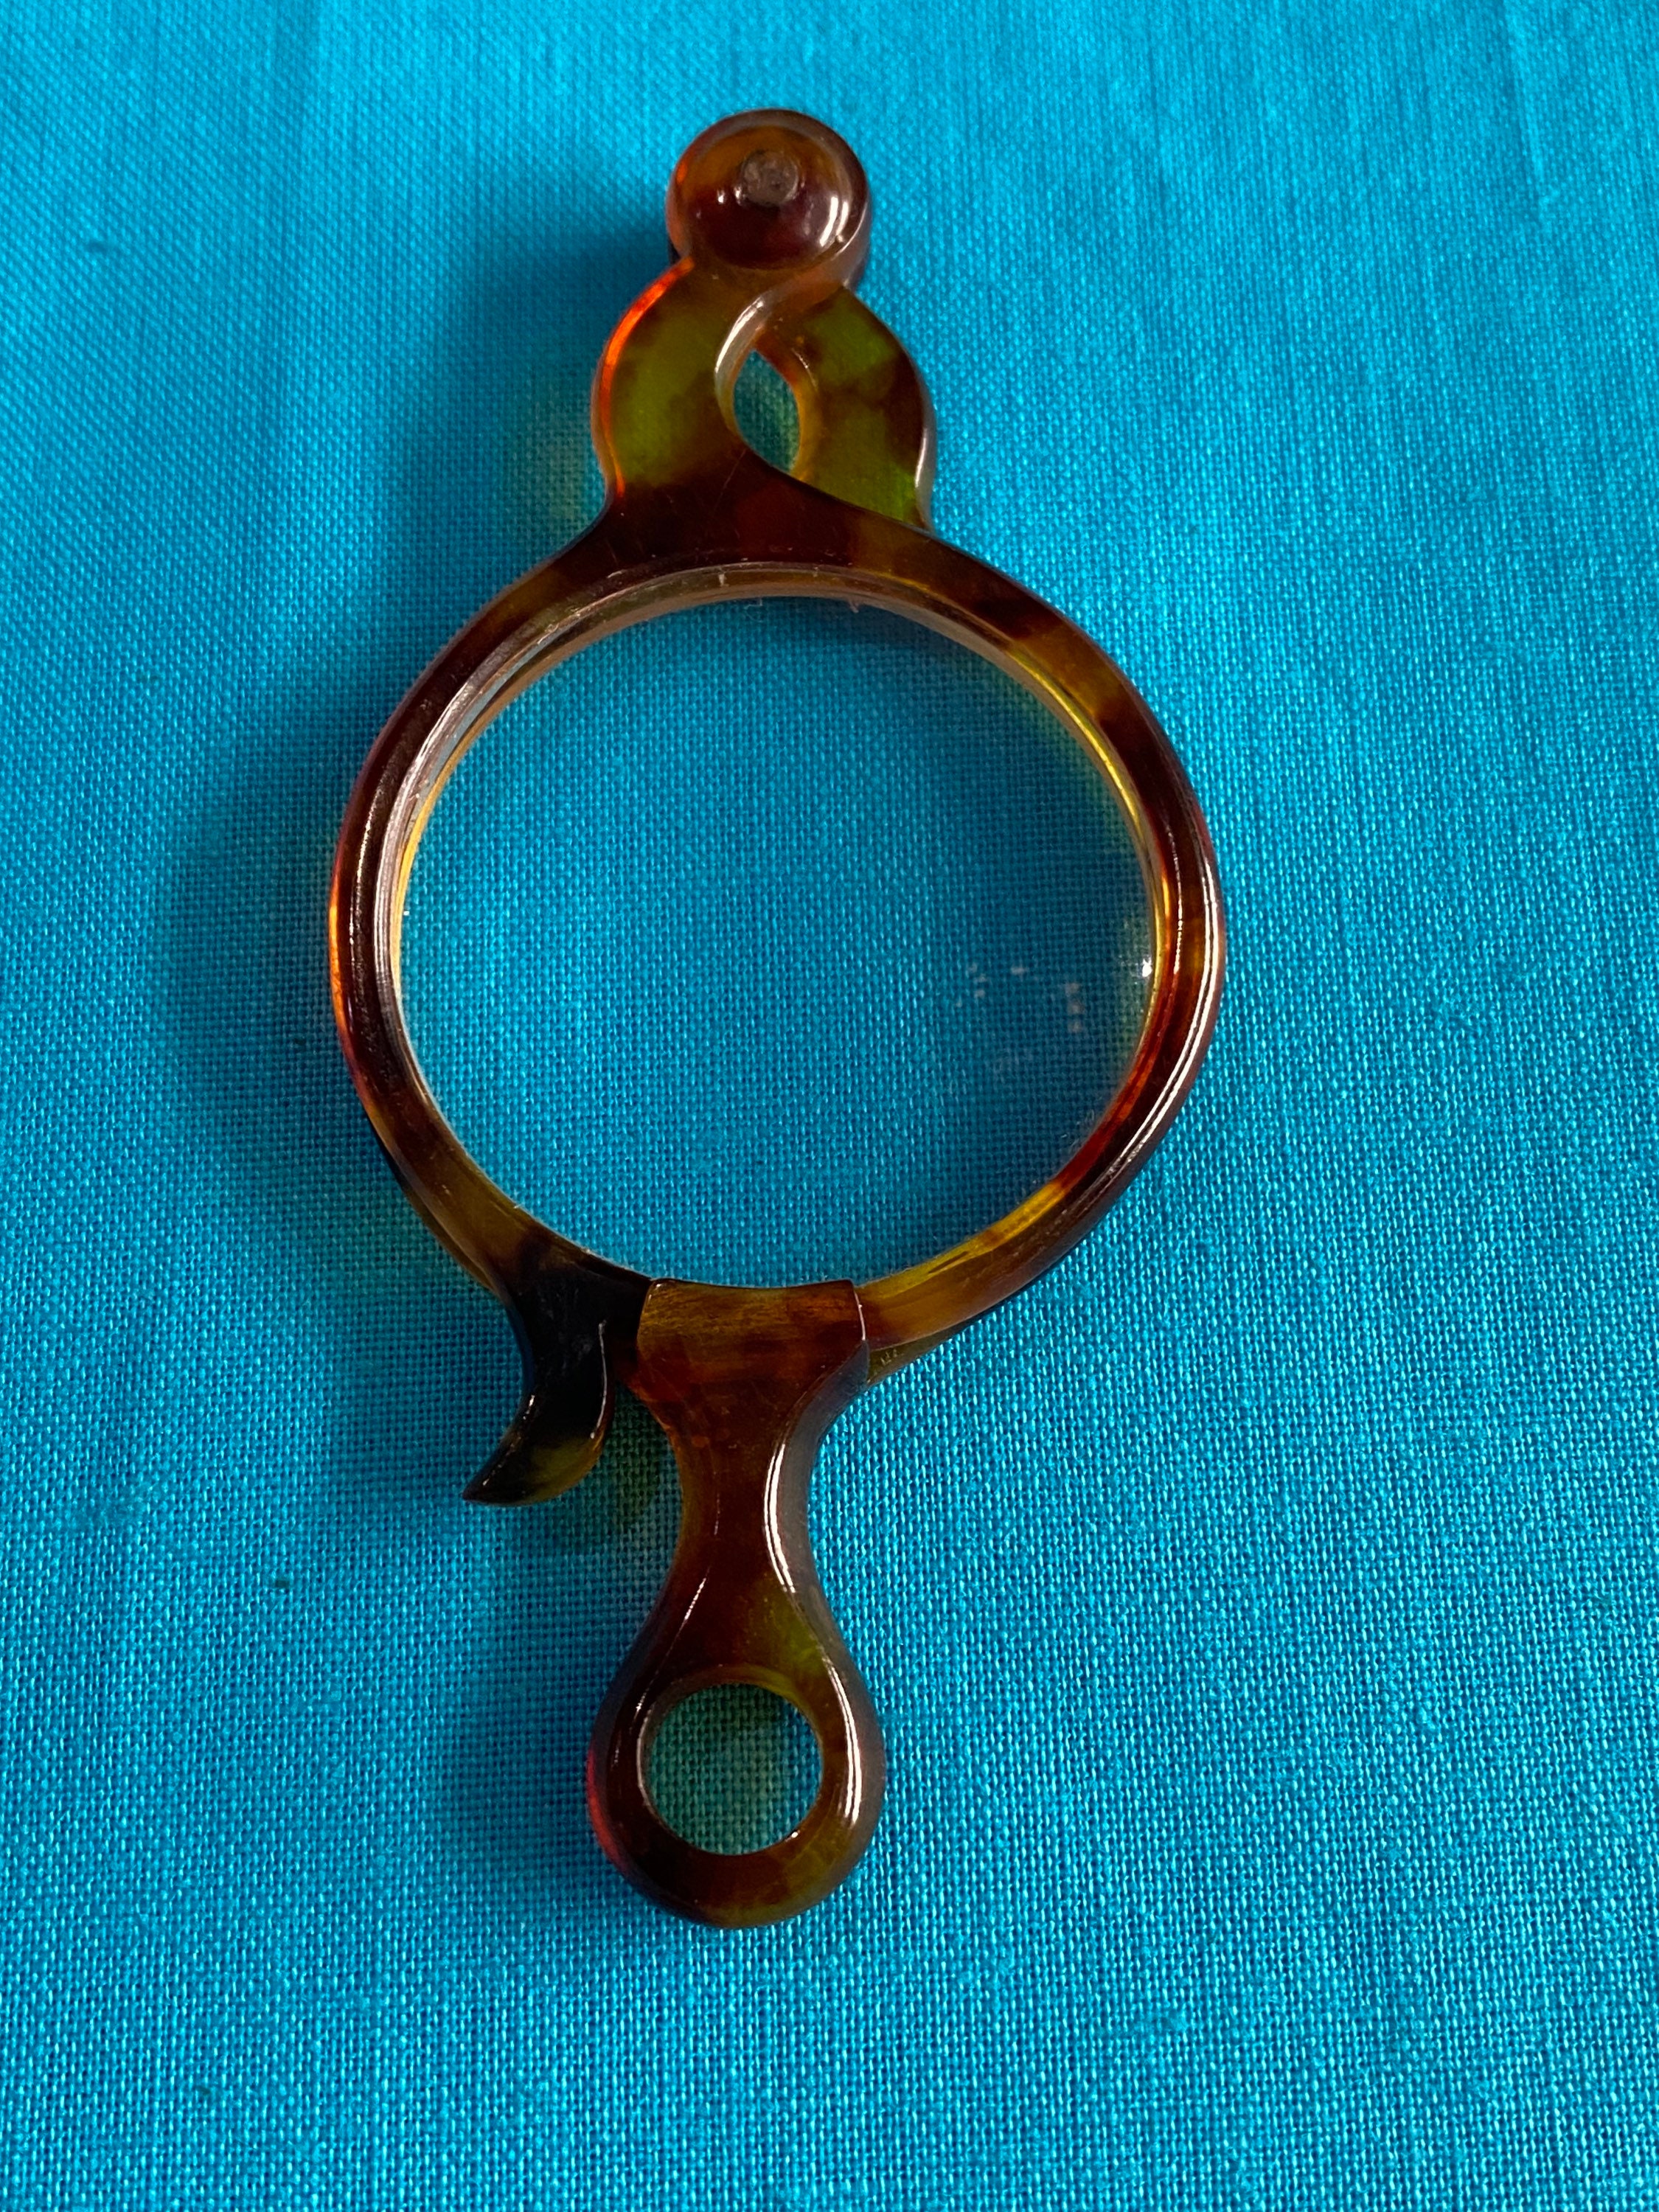 Hand Held Magnifying Eyeglasses Lorgnettes Solid Brass Frame Antique Style